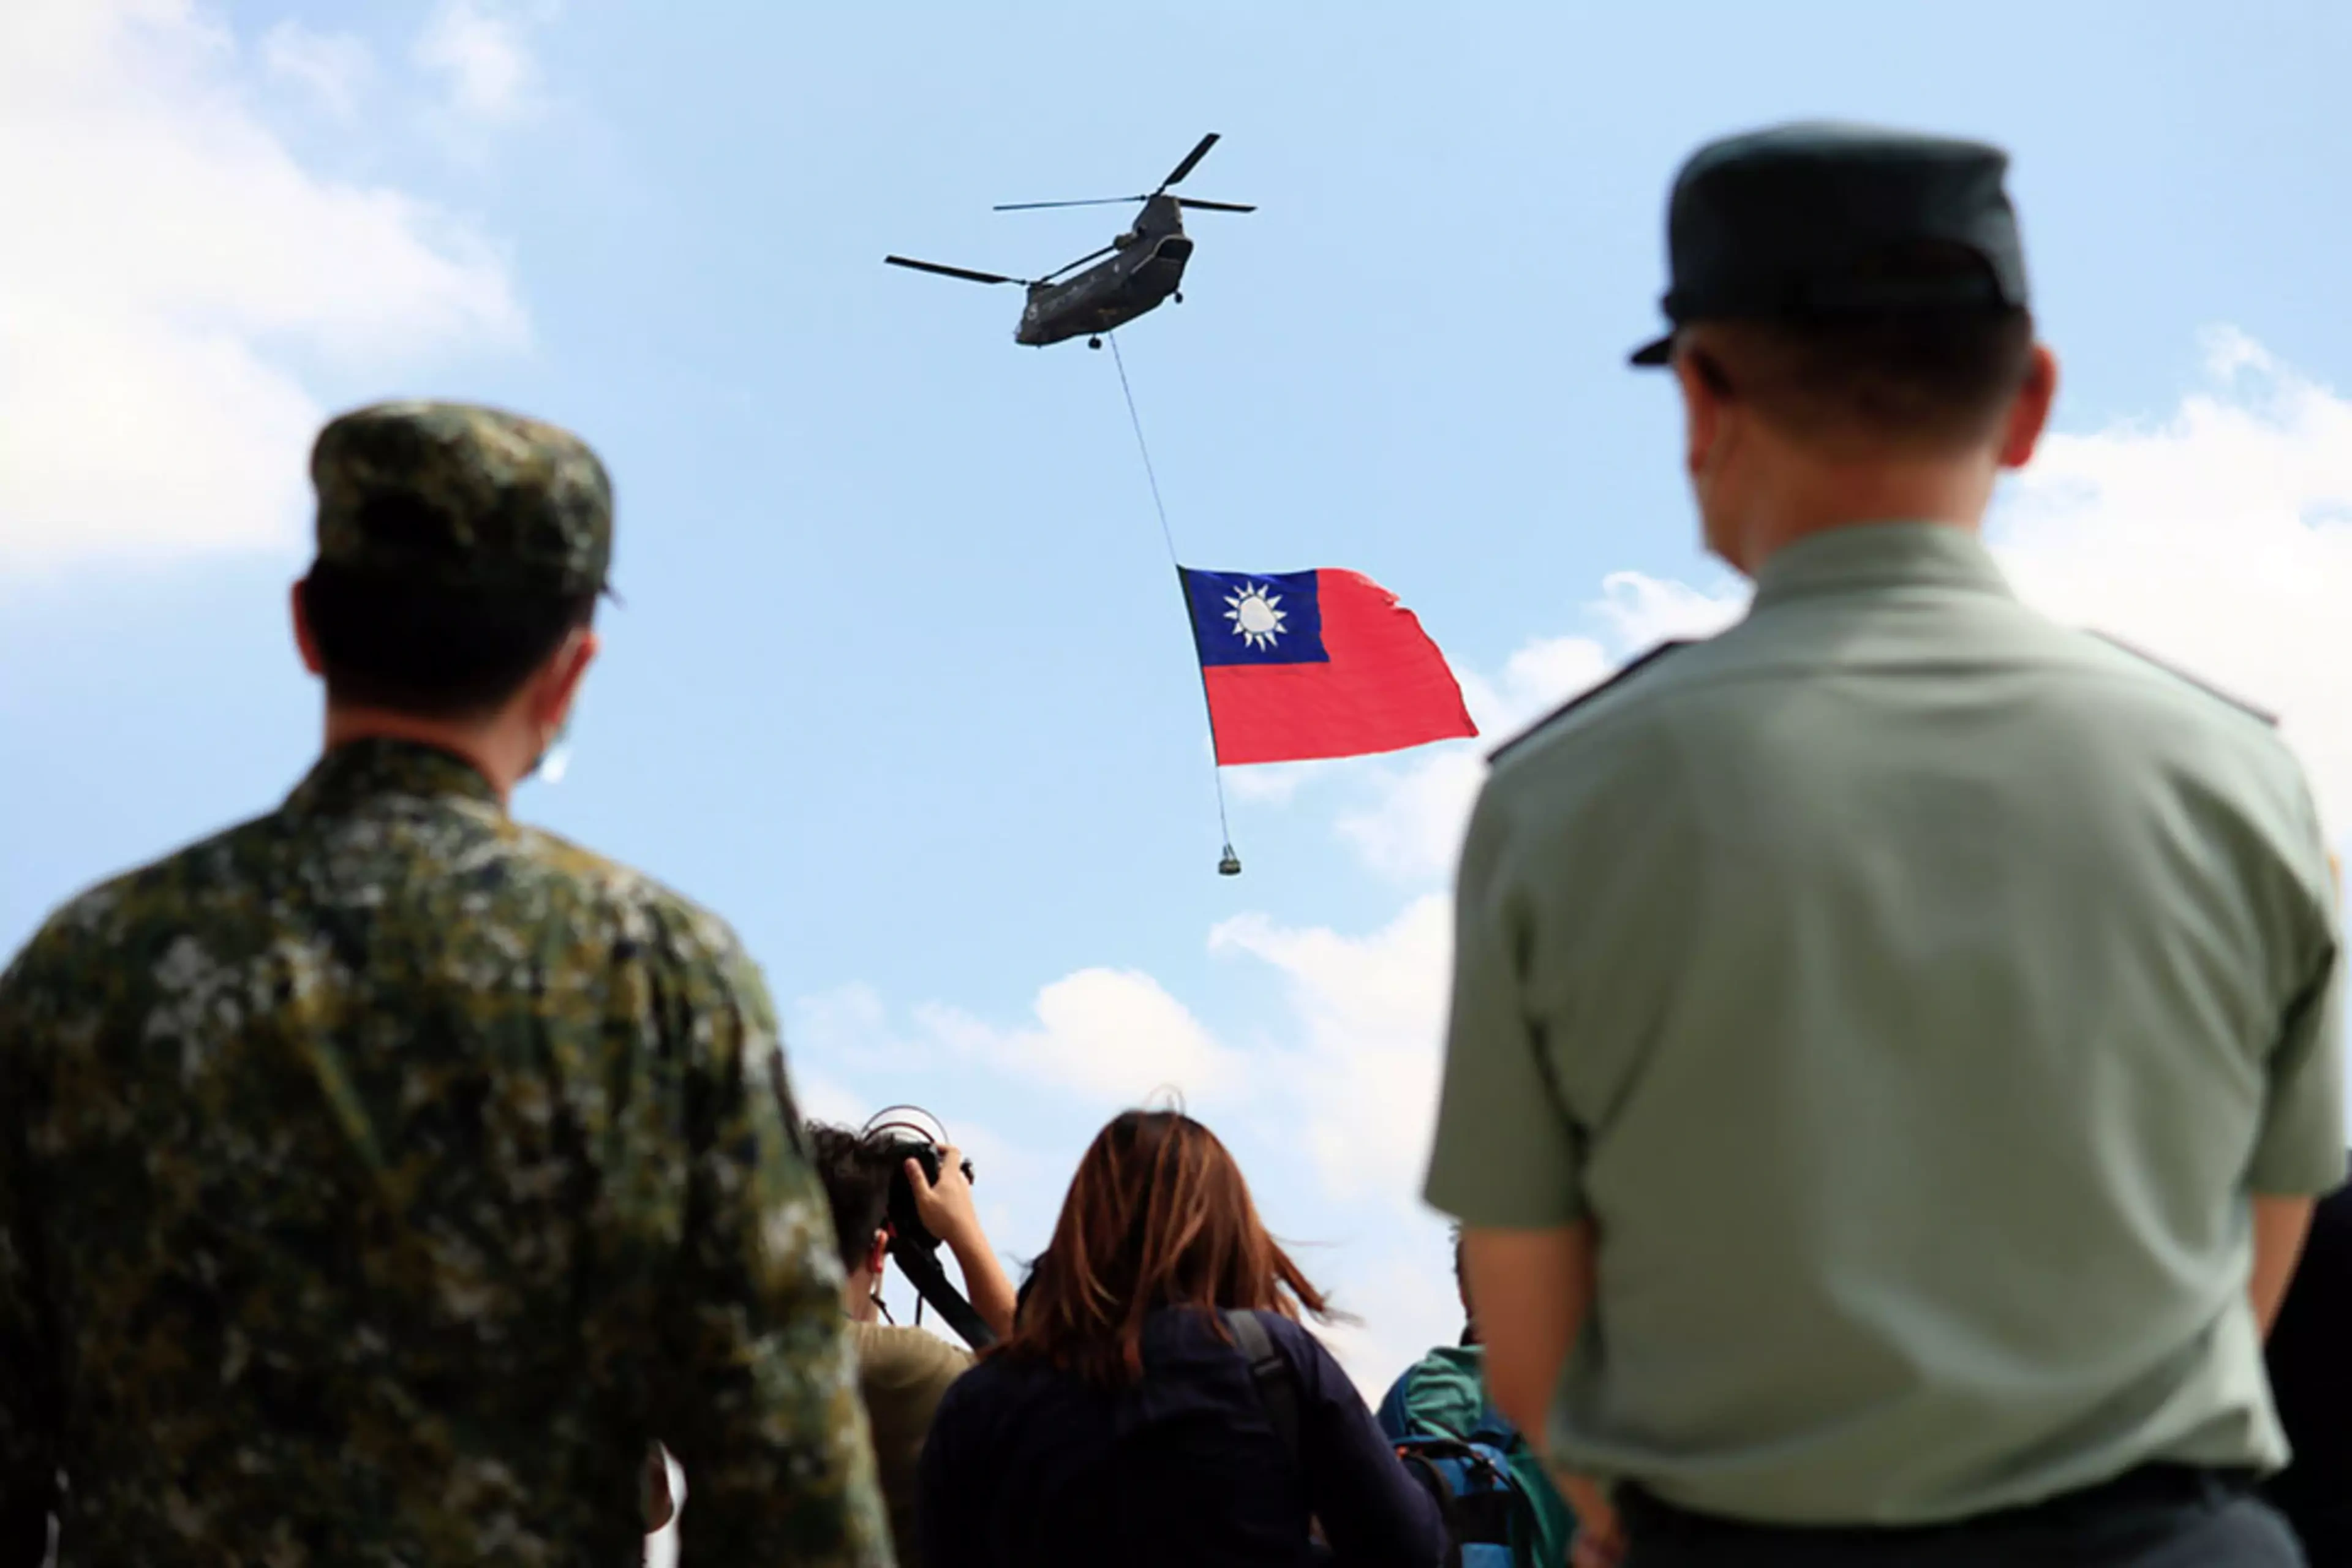 A helicopter flies a Taiwanese flag in Taoyuan, Taiwan.